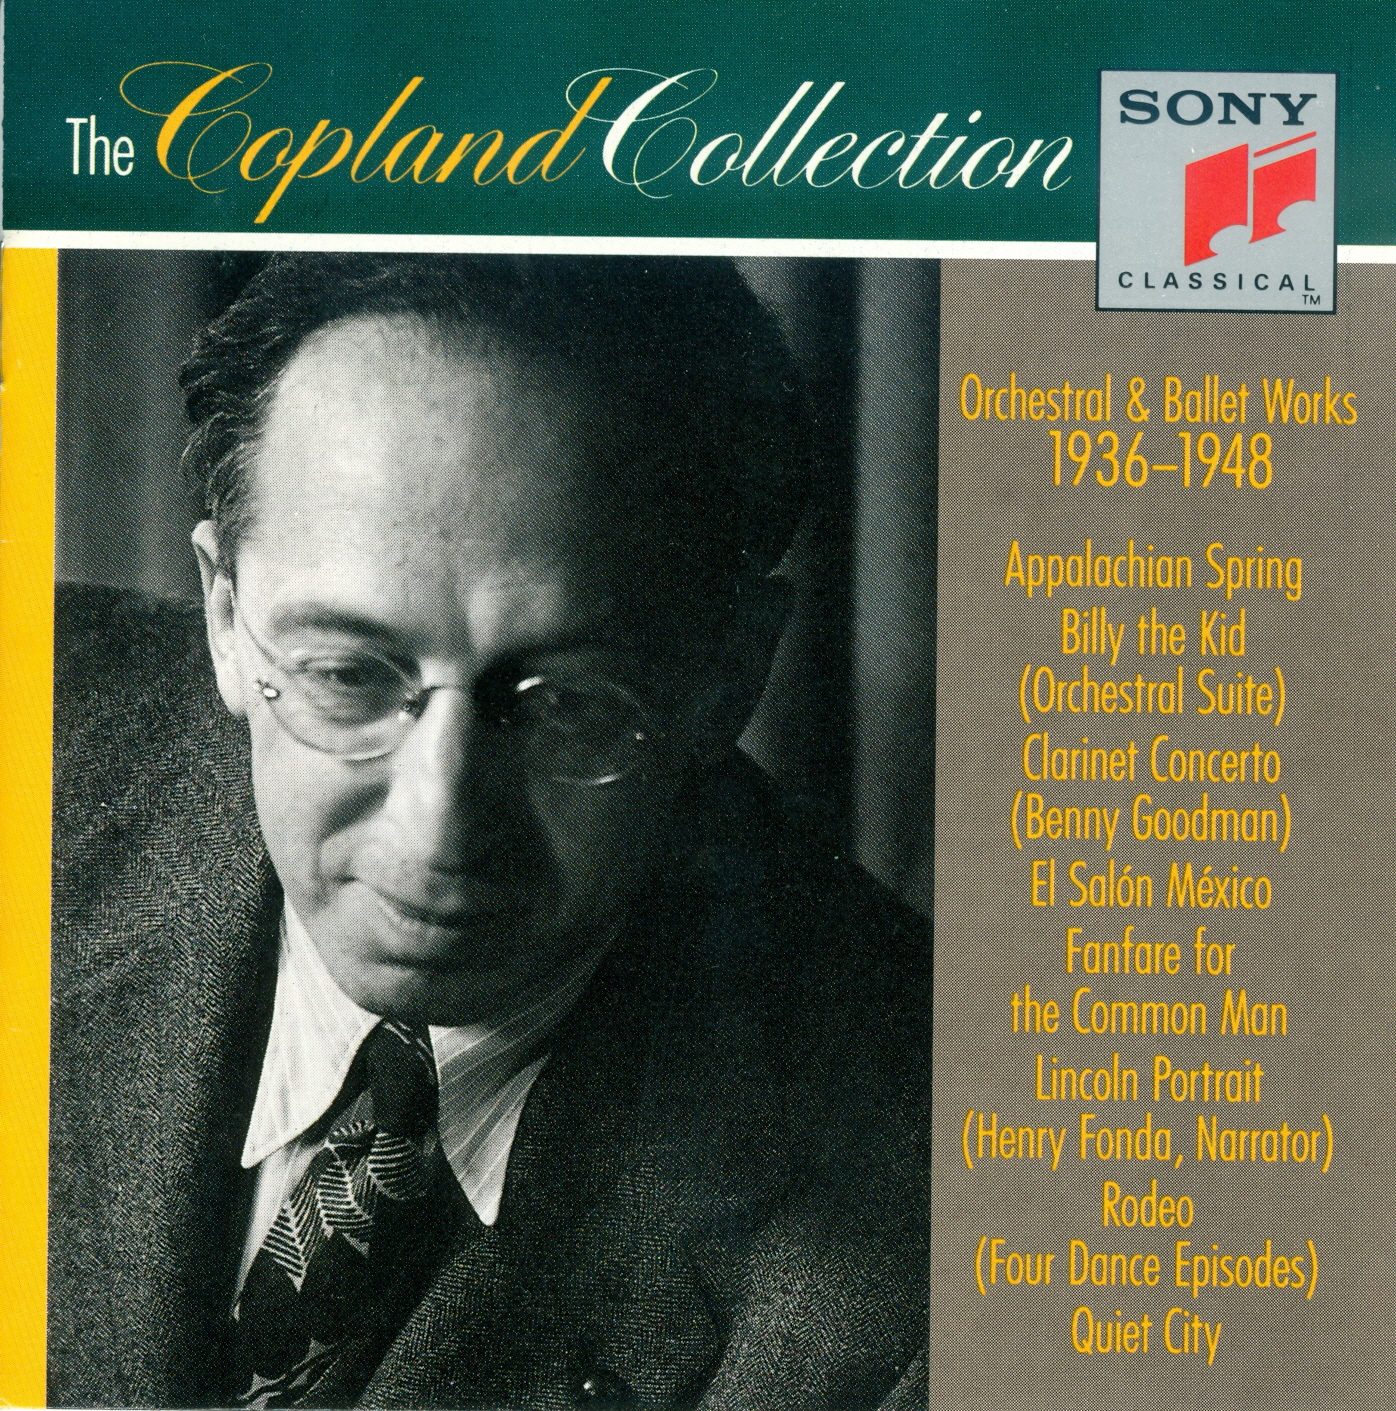 Aaron Copland - The Copland Collection 1936-1948 - Disc 1